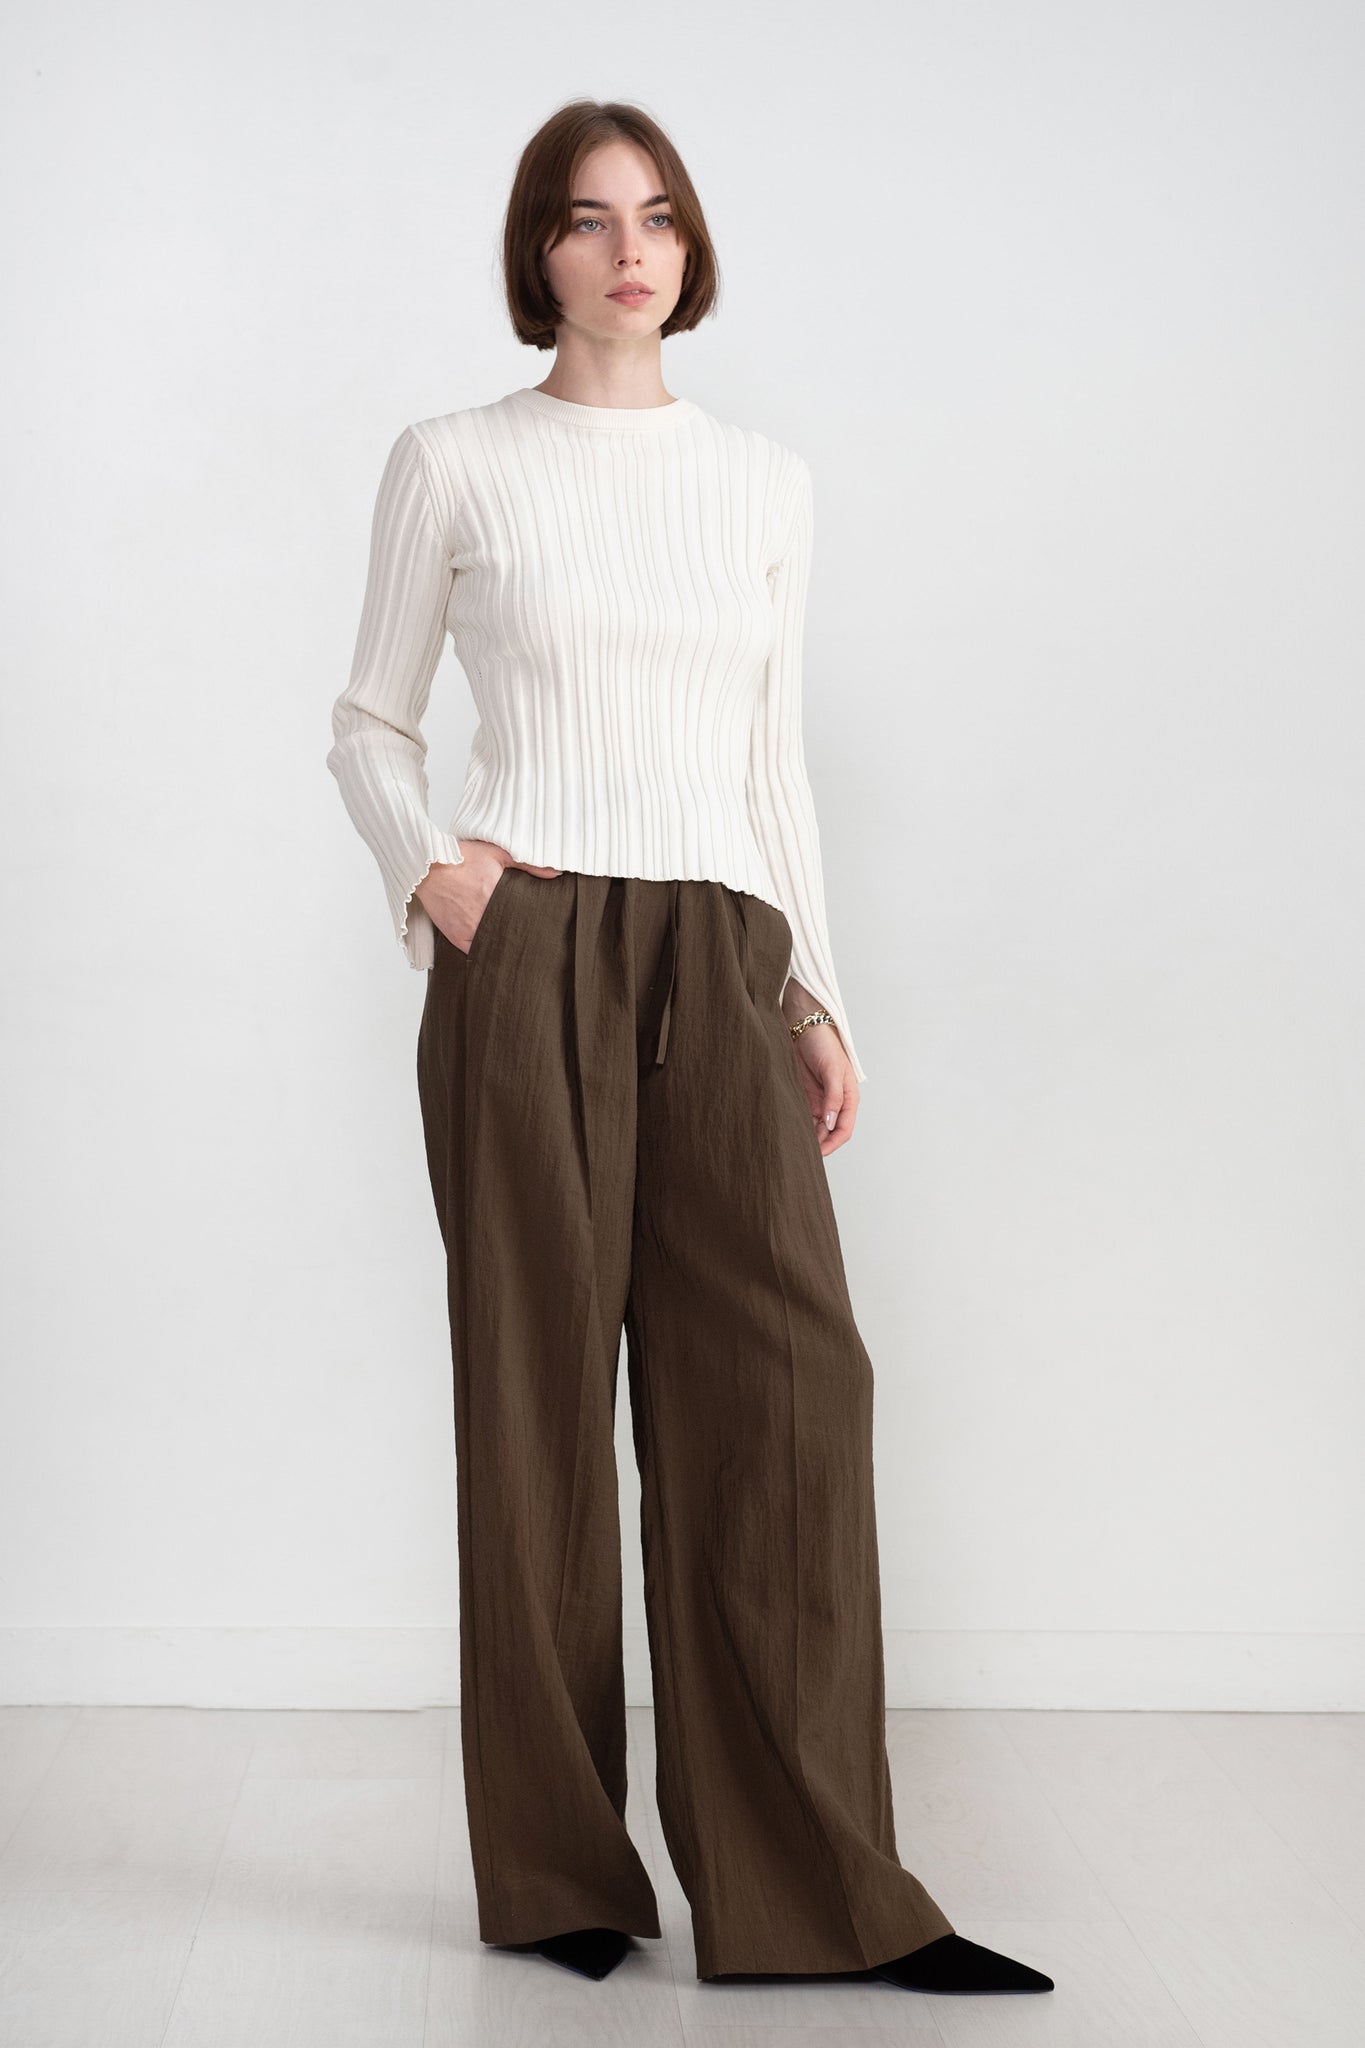 LOULOU STUDIO - Evie Ribbed Top, Rice Ivory